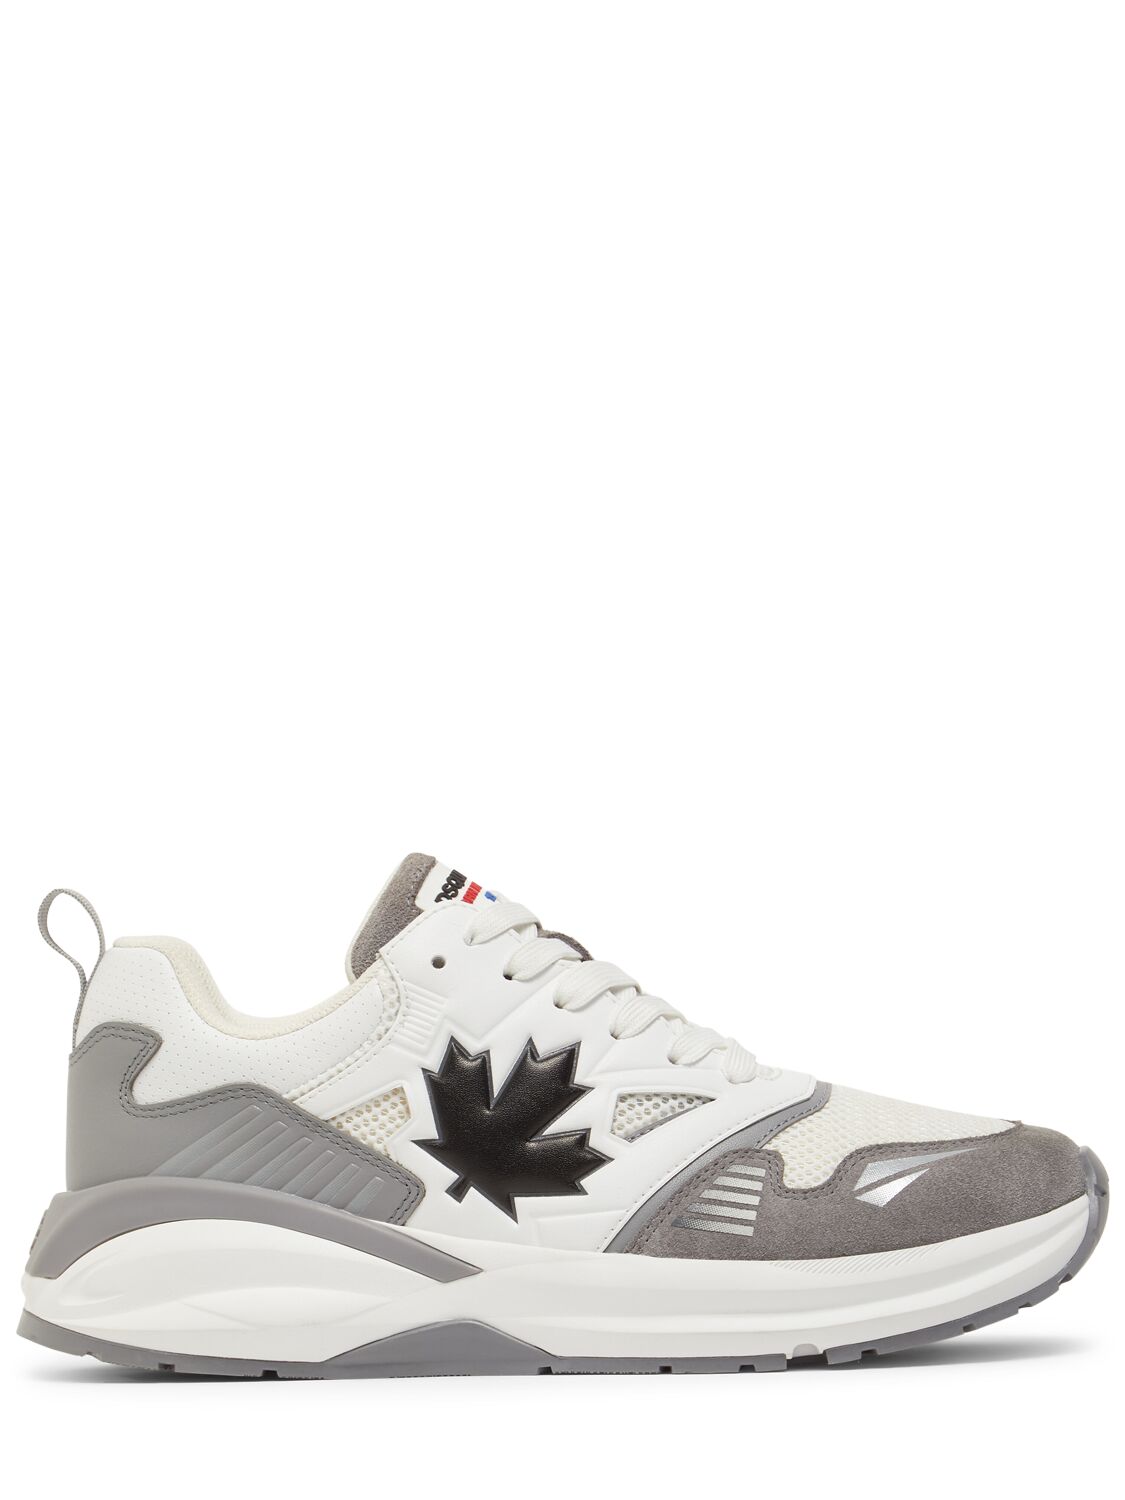 Dsquared2 Dash Low Top Sneakers In Bianco Grey